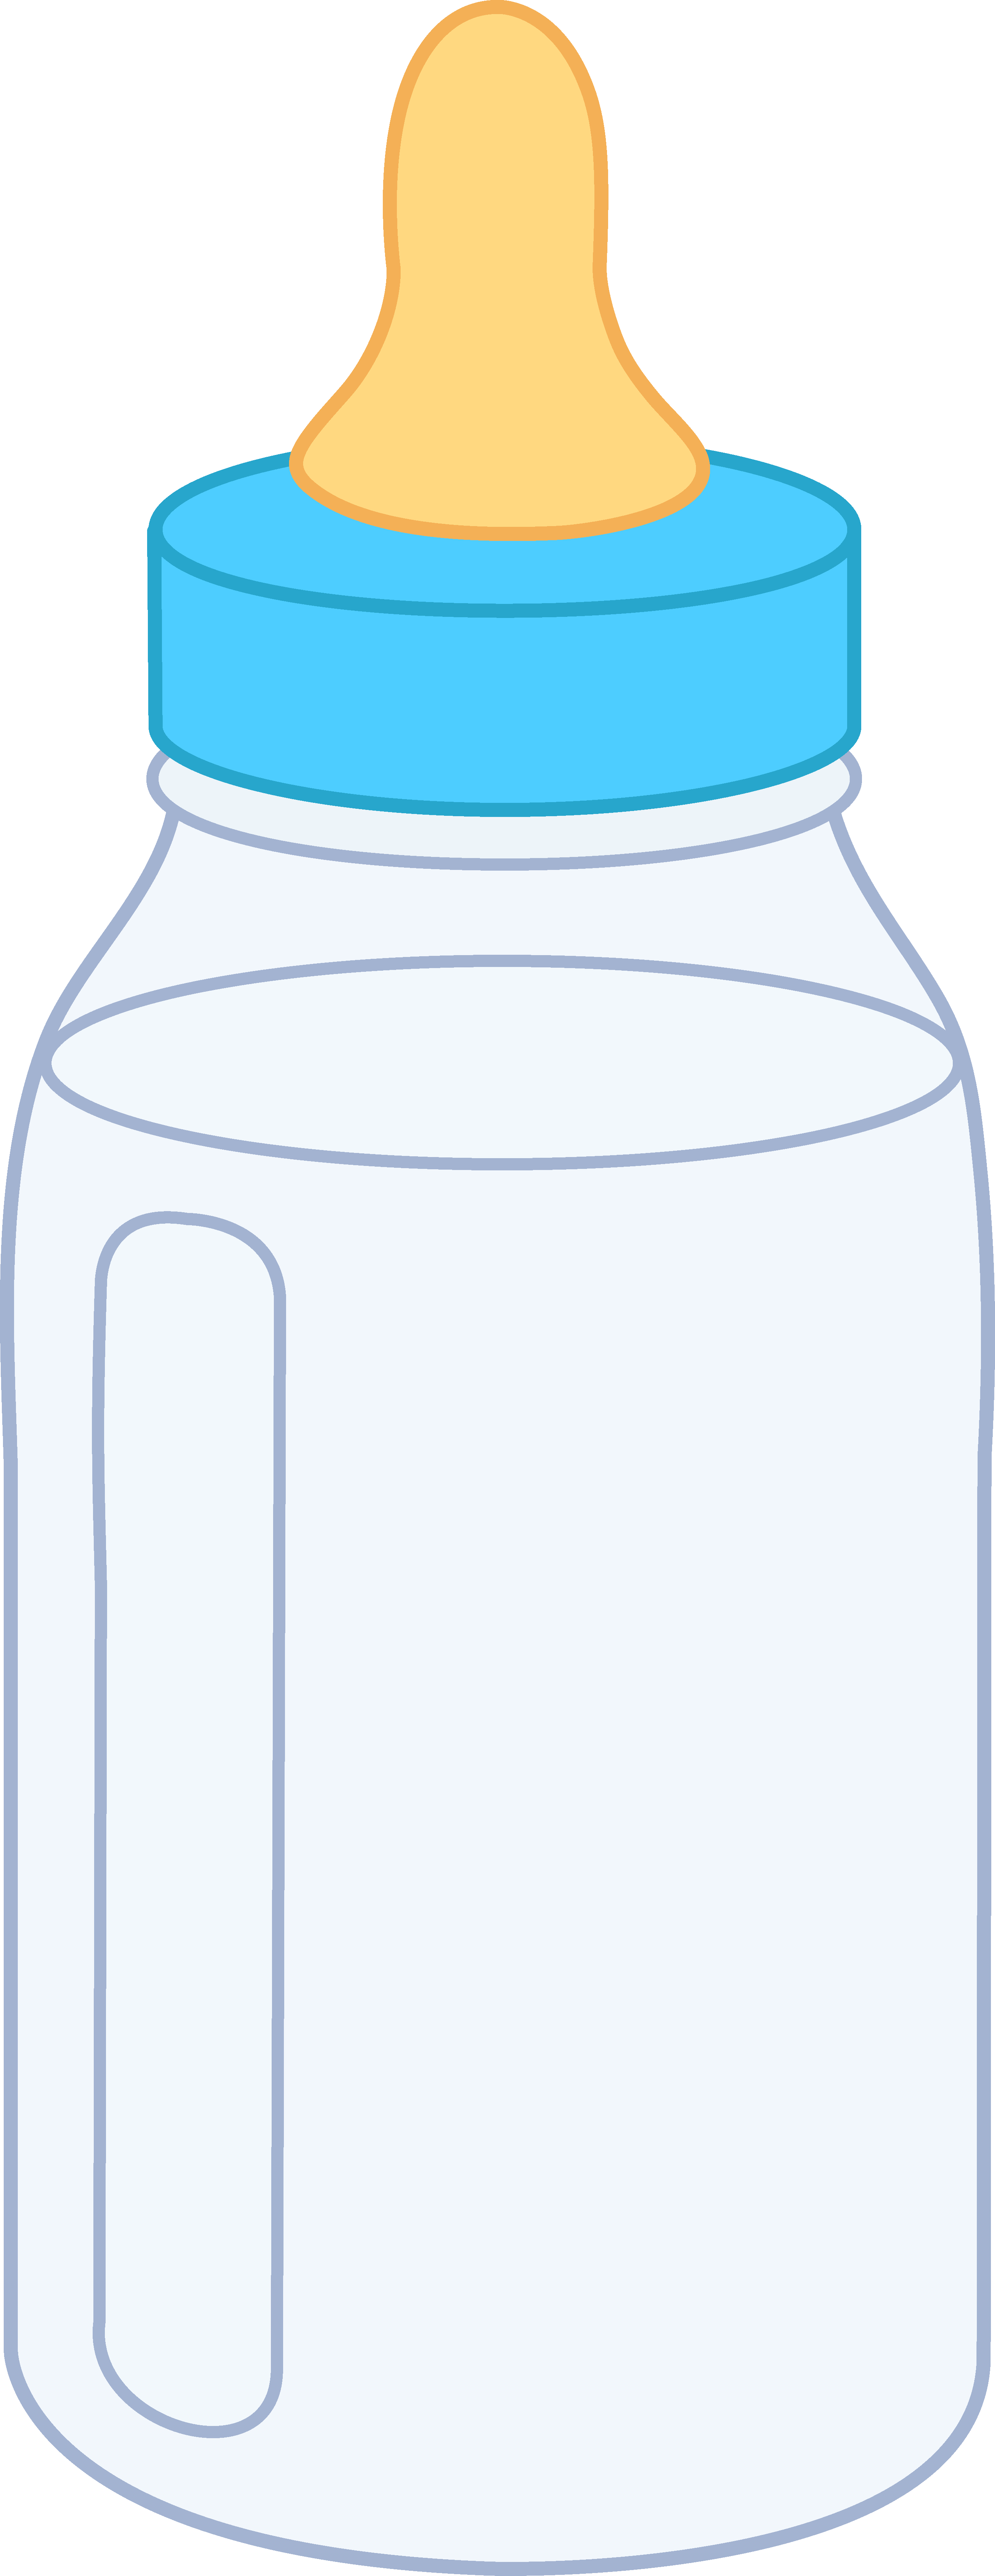 Free Baby Bottle Clipart, Download Free Clip Art, Free Clip